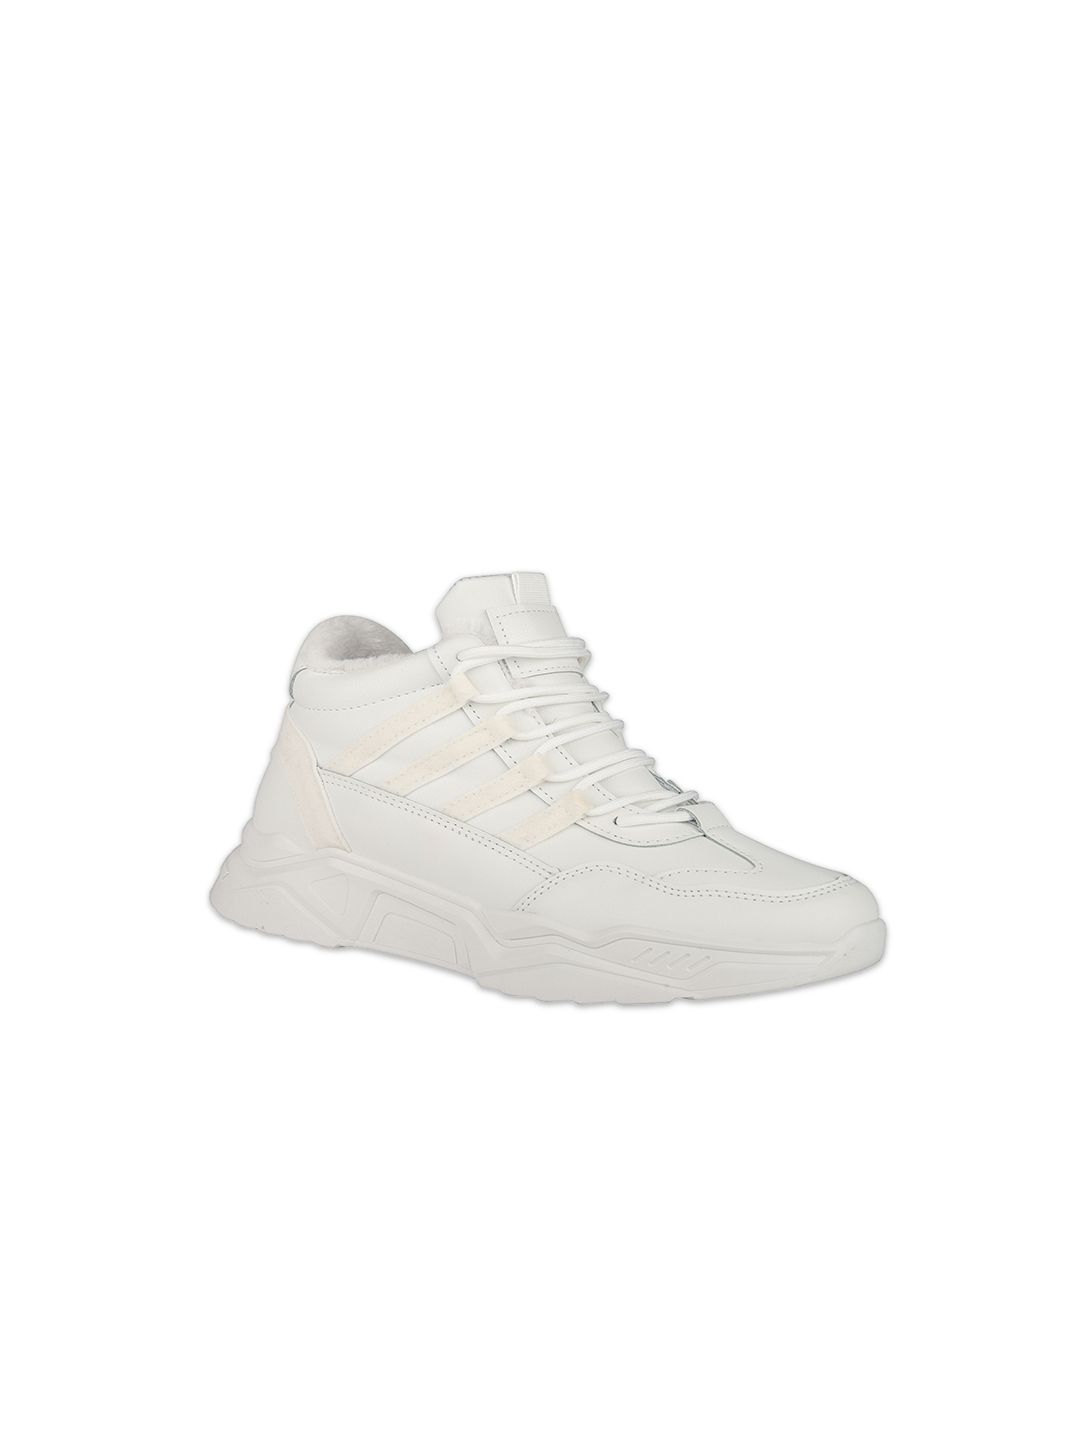 CASSIEY Women White High-Top Walking Shoes Price in India